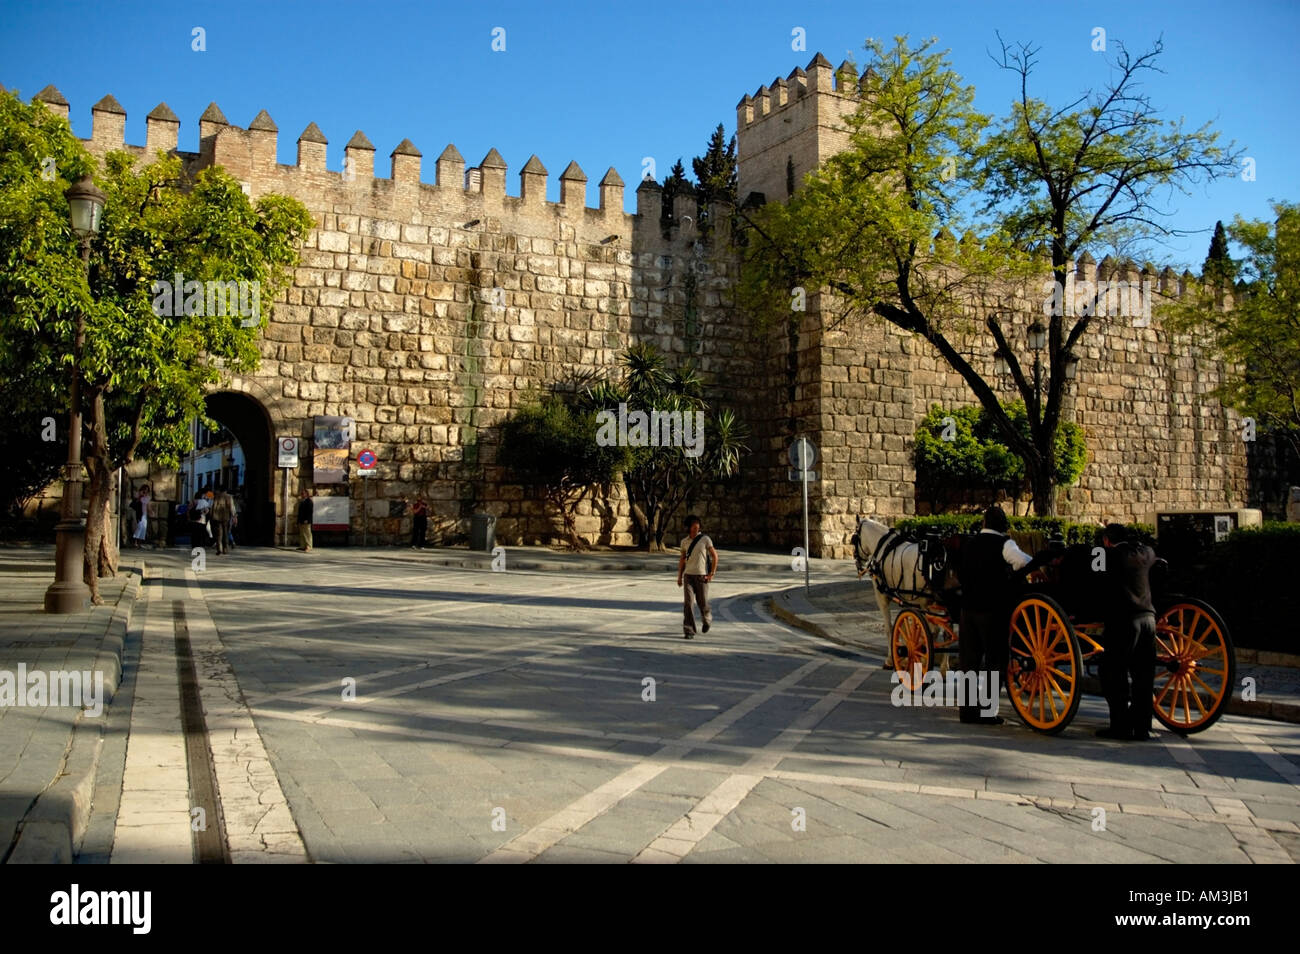 Horsedrawn cart waiting by stone wall in the Alcazar of Seville, Andalusia, Spain. Stock Photo